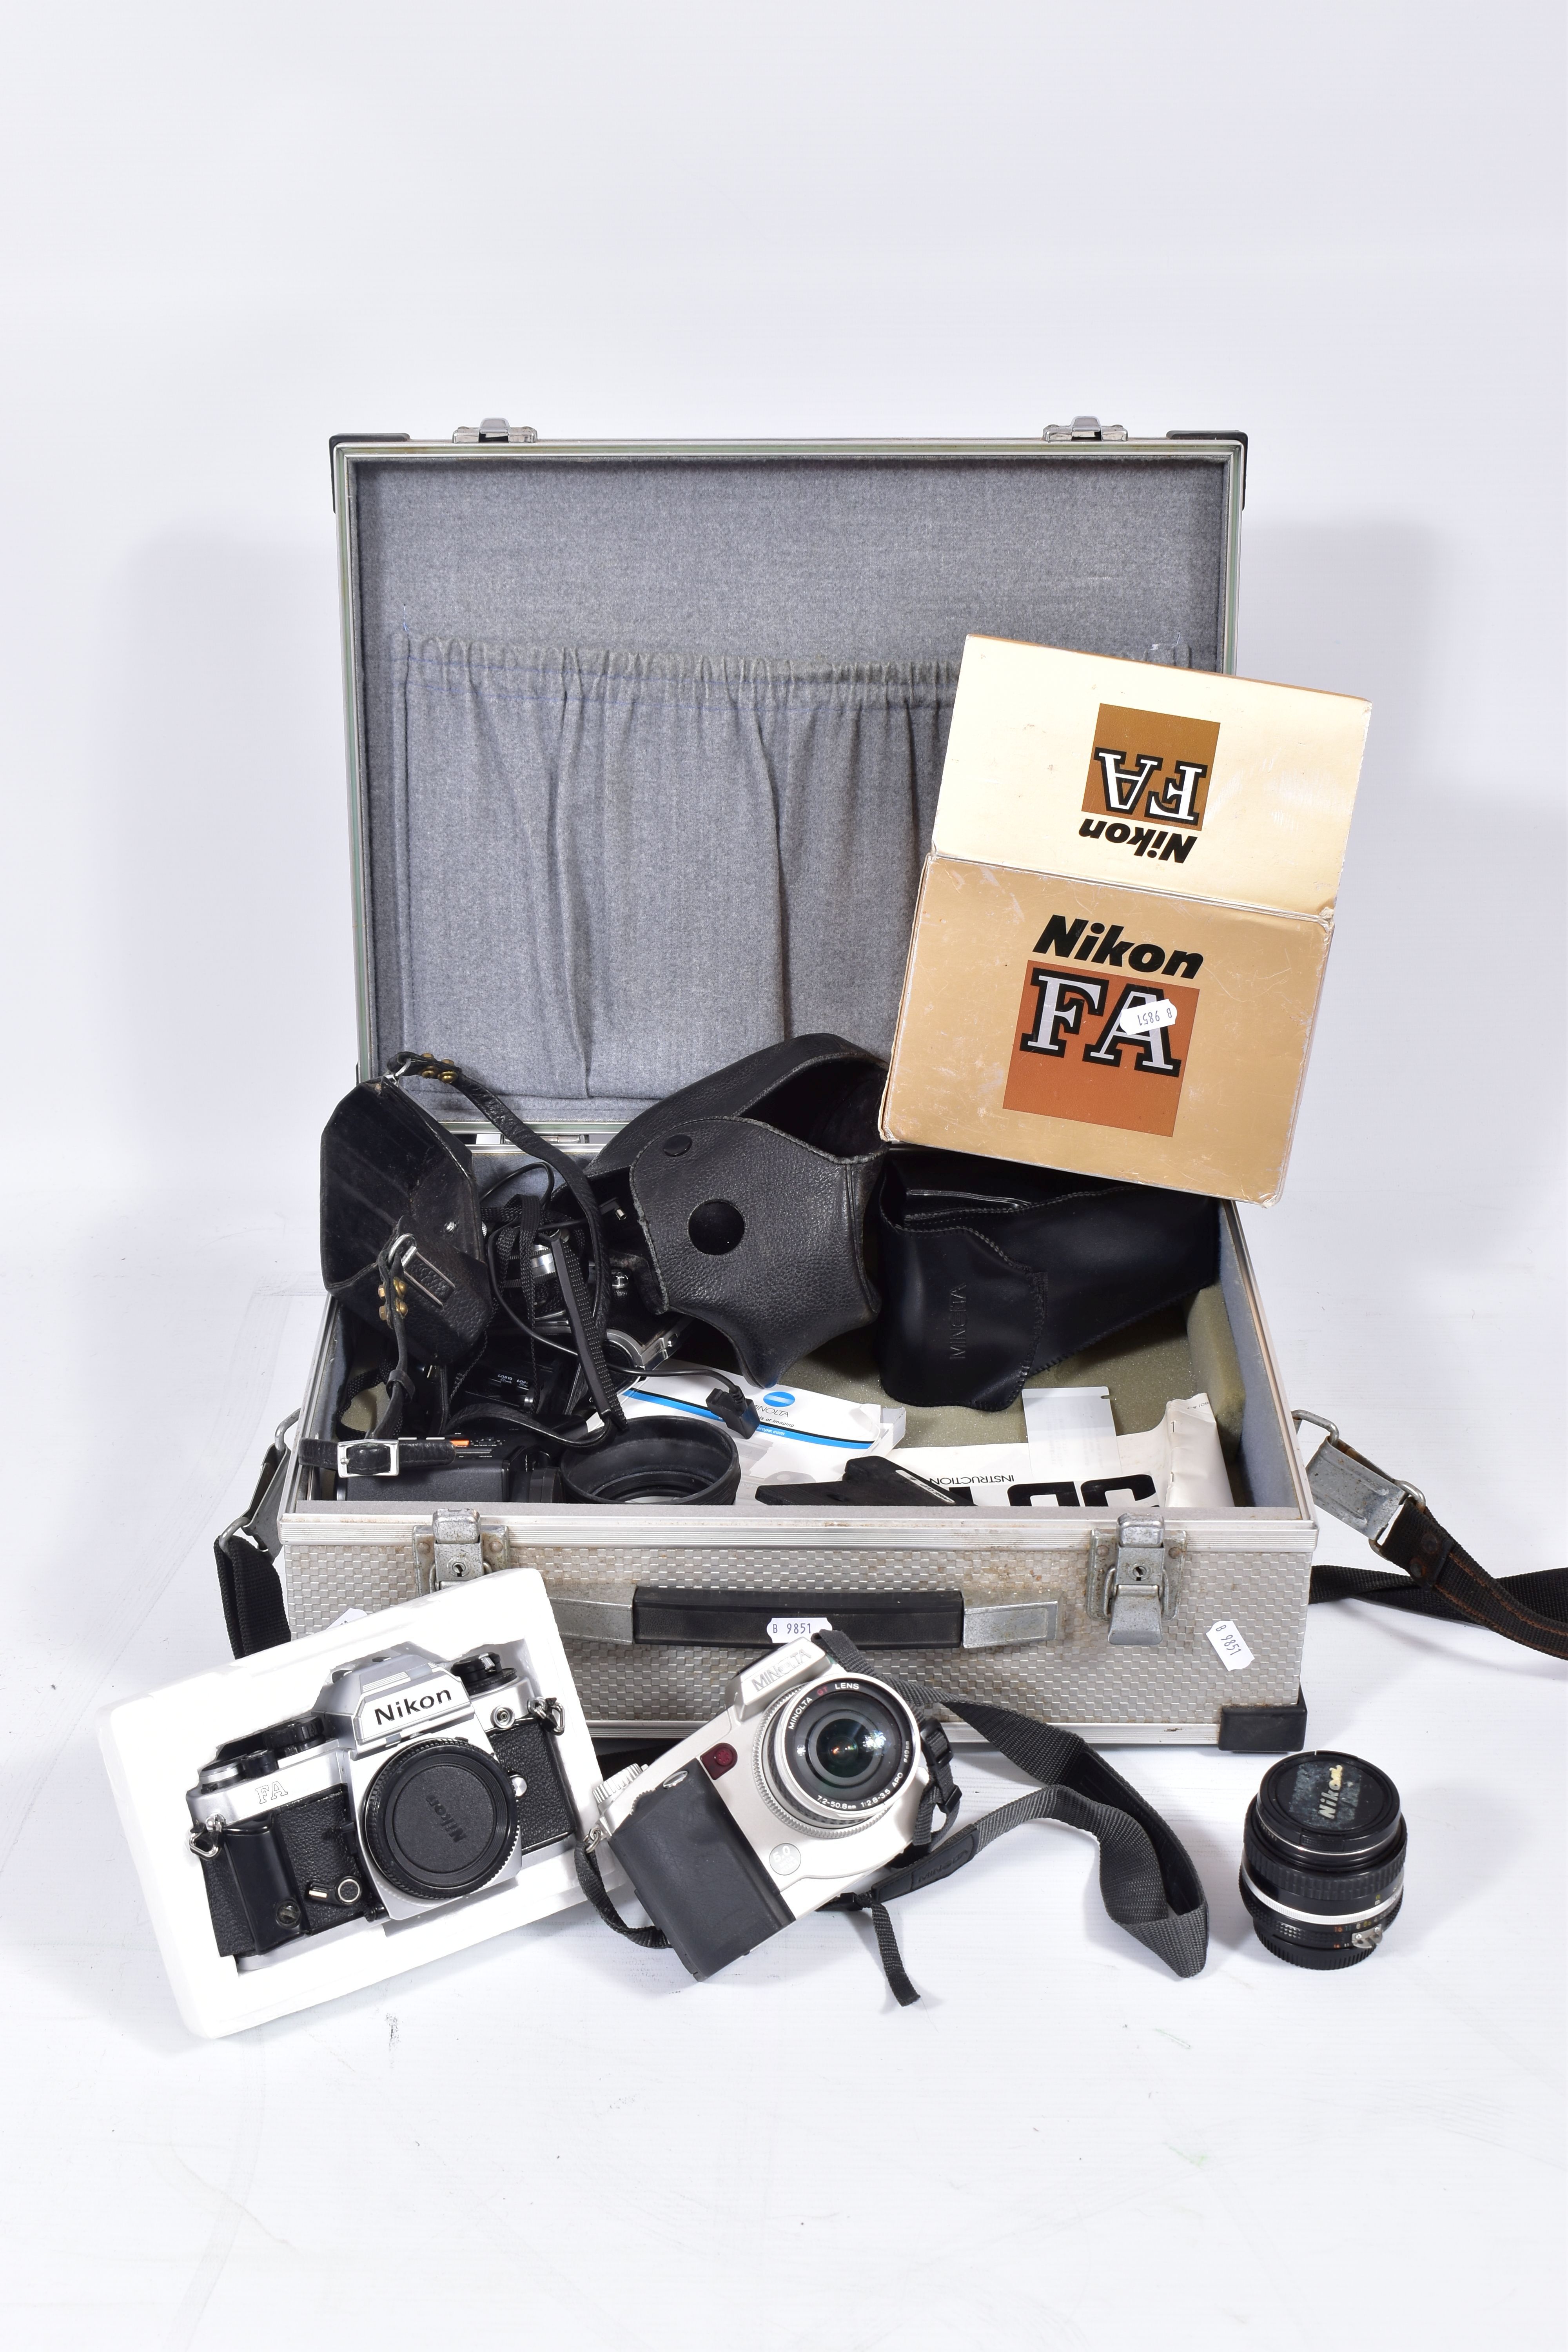 AN ALUMINIUM CASE CONTAINING A NIKON FA FILM SLR BODY in box( doesn't appear to Wind on ) a Nikkor